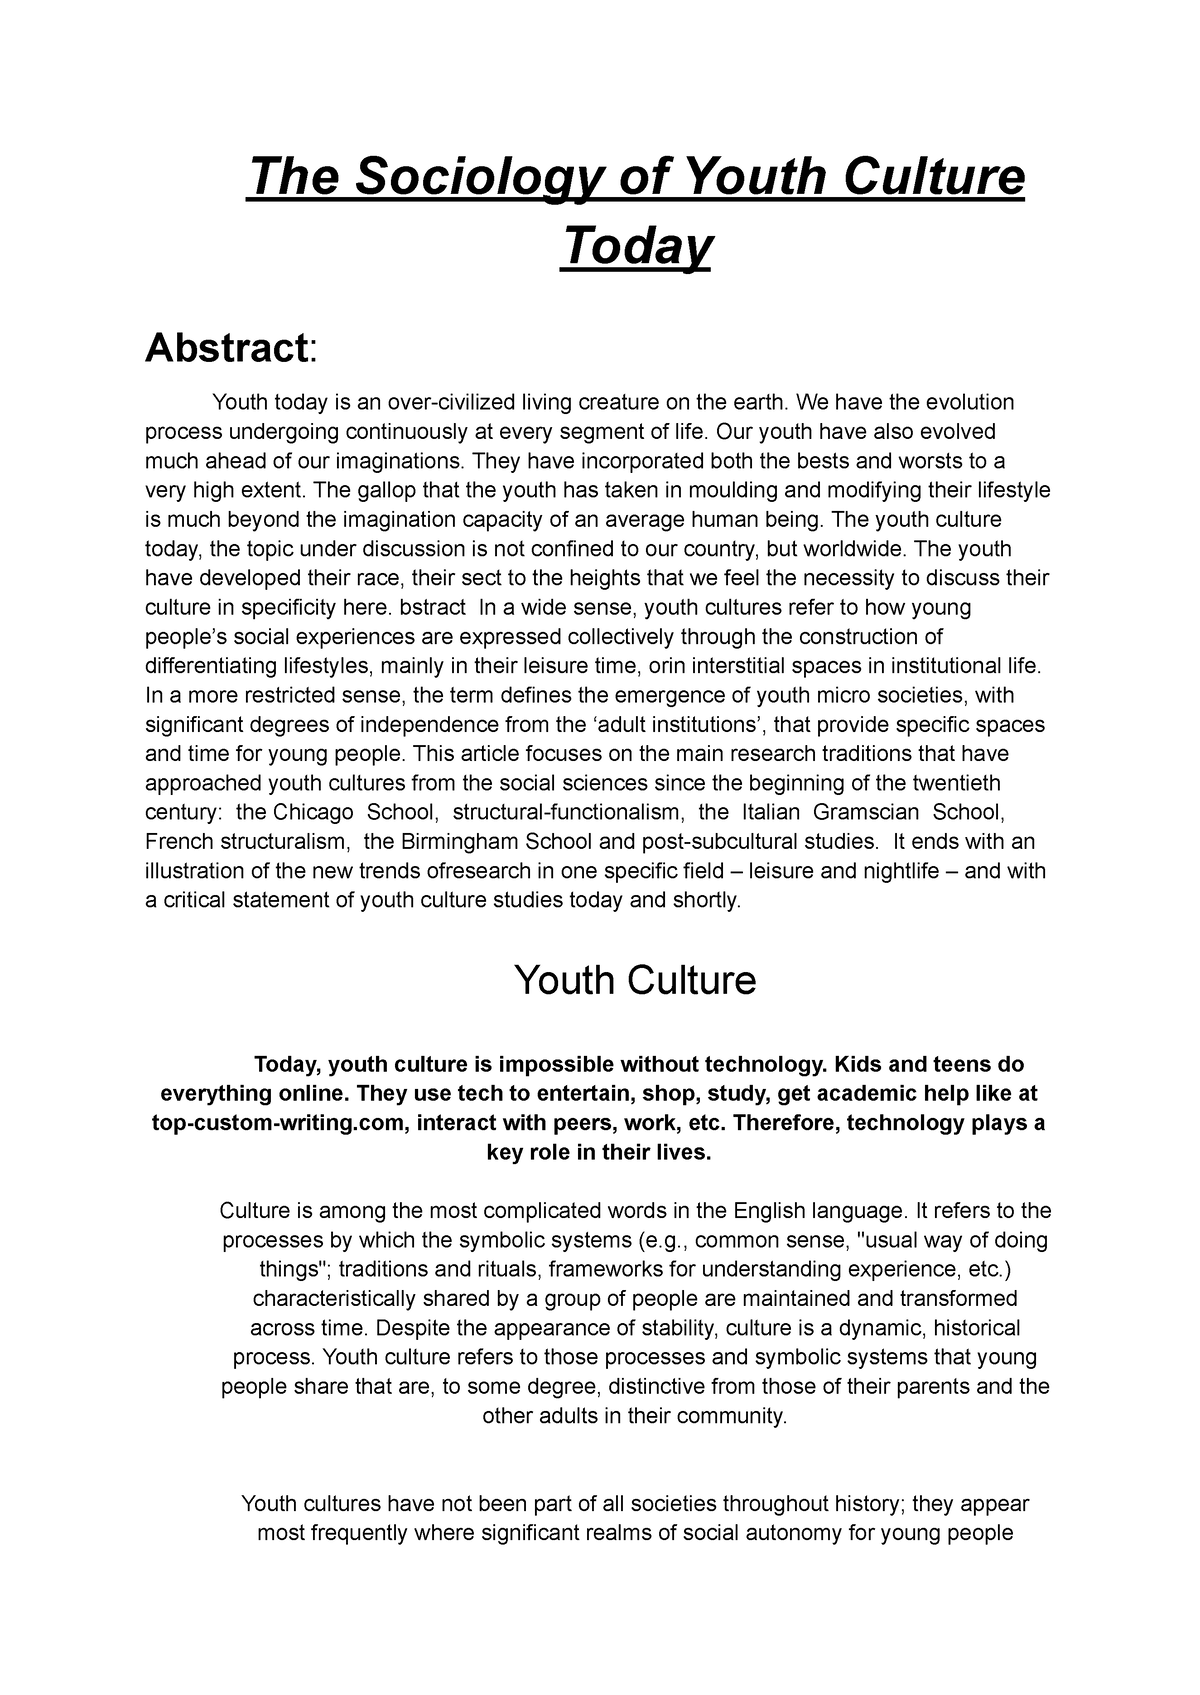 youth culture today essay